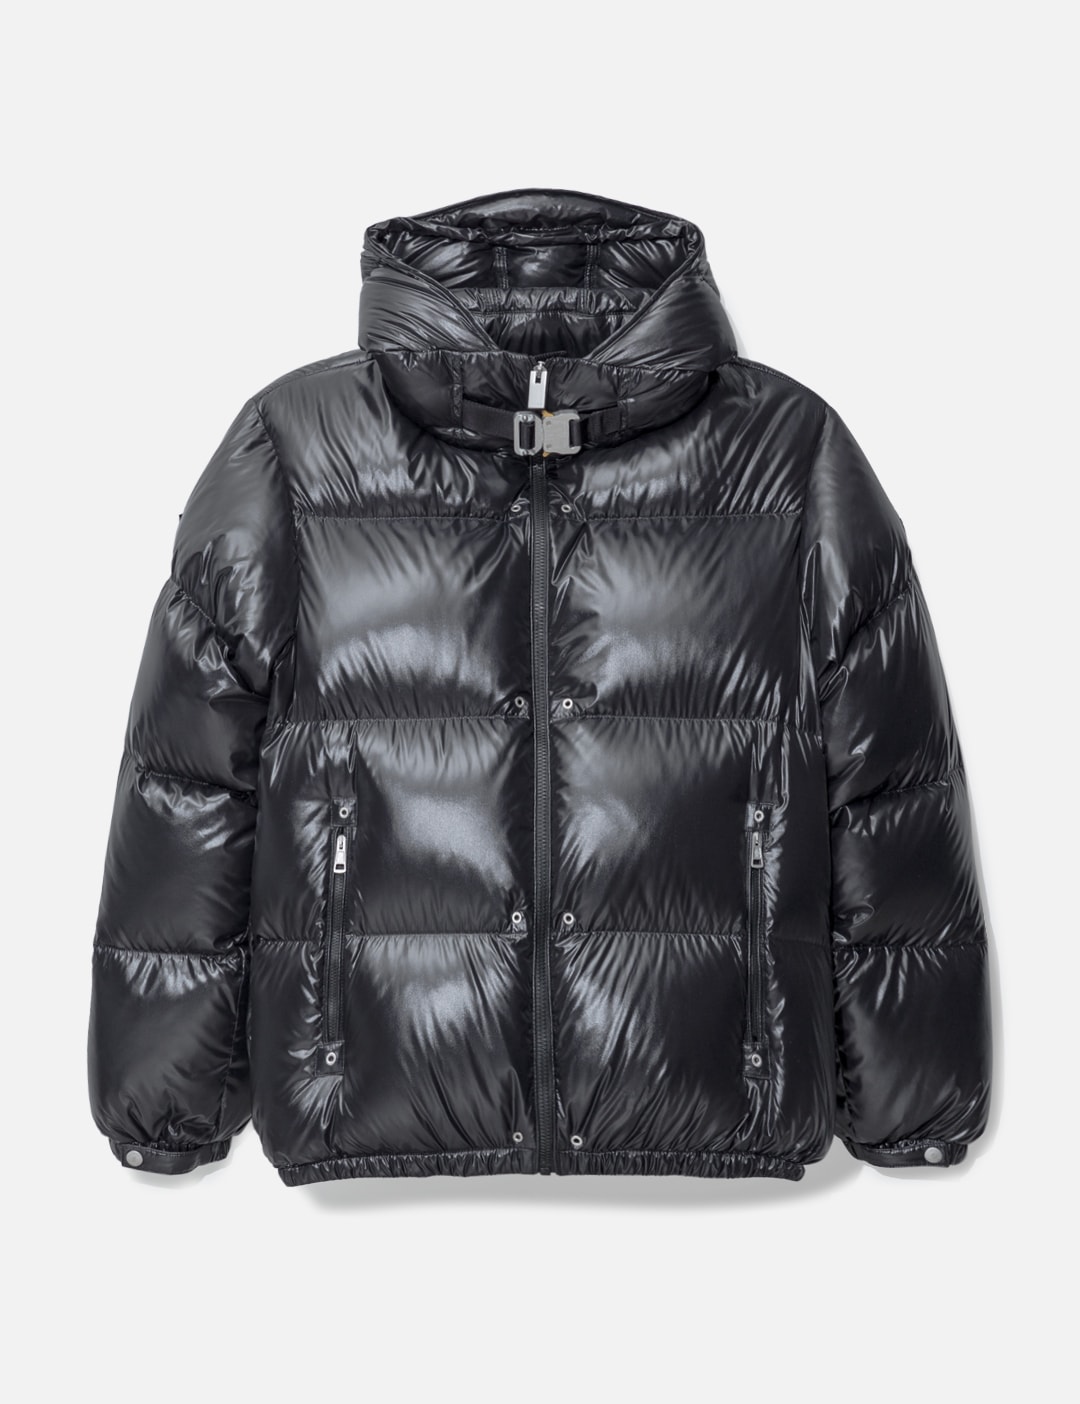 Malawi Migratie Mediaan Moncler Genius - 6 Moncler 1017 ALYX 9SM Almondis Jacket | HBX - Globally  Curated Fashion and Lifestyle by Hypebeast